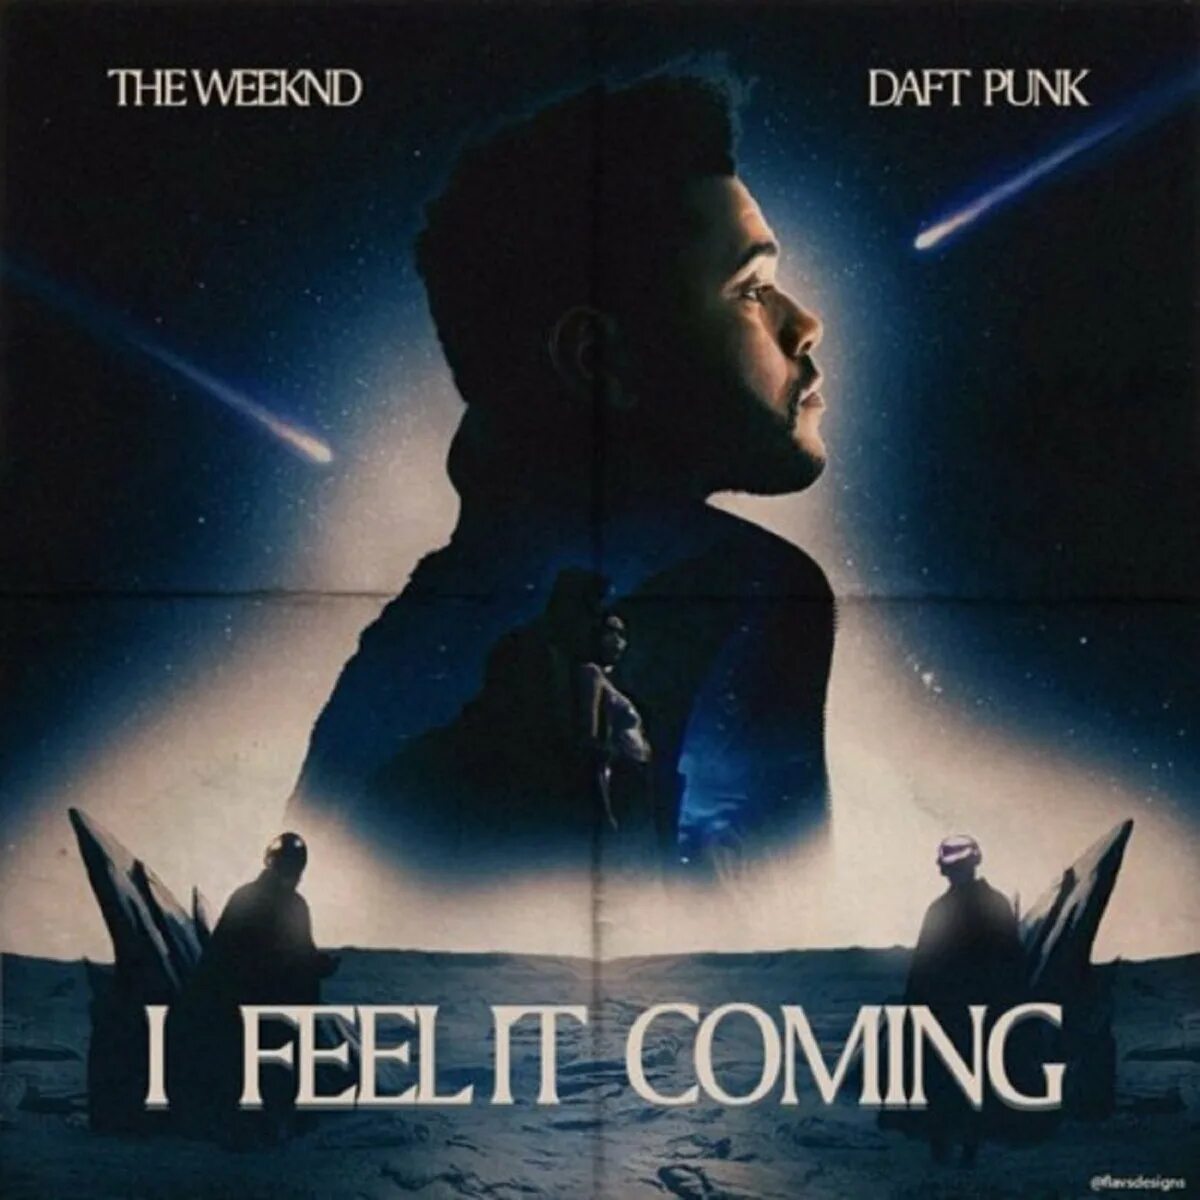 Feeling i want you now. I feel it coming the Weeknd. The Weeknd Daft Punk i feel it coming. The weekend Daft Punk. Weeknd feel it coming.